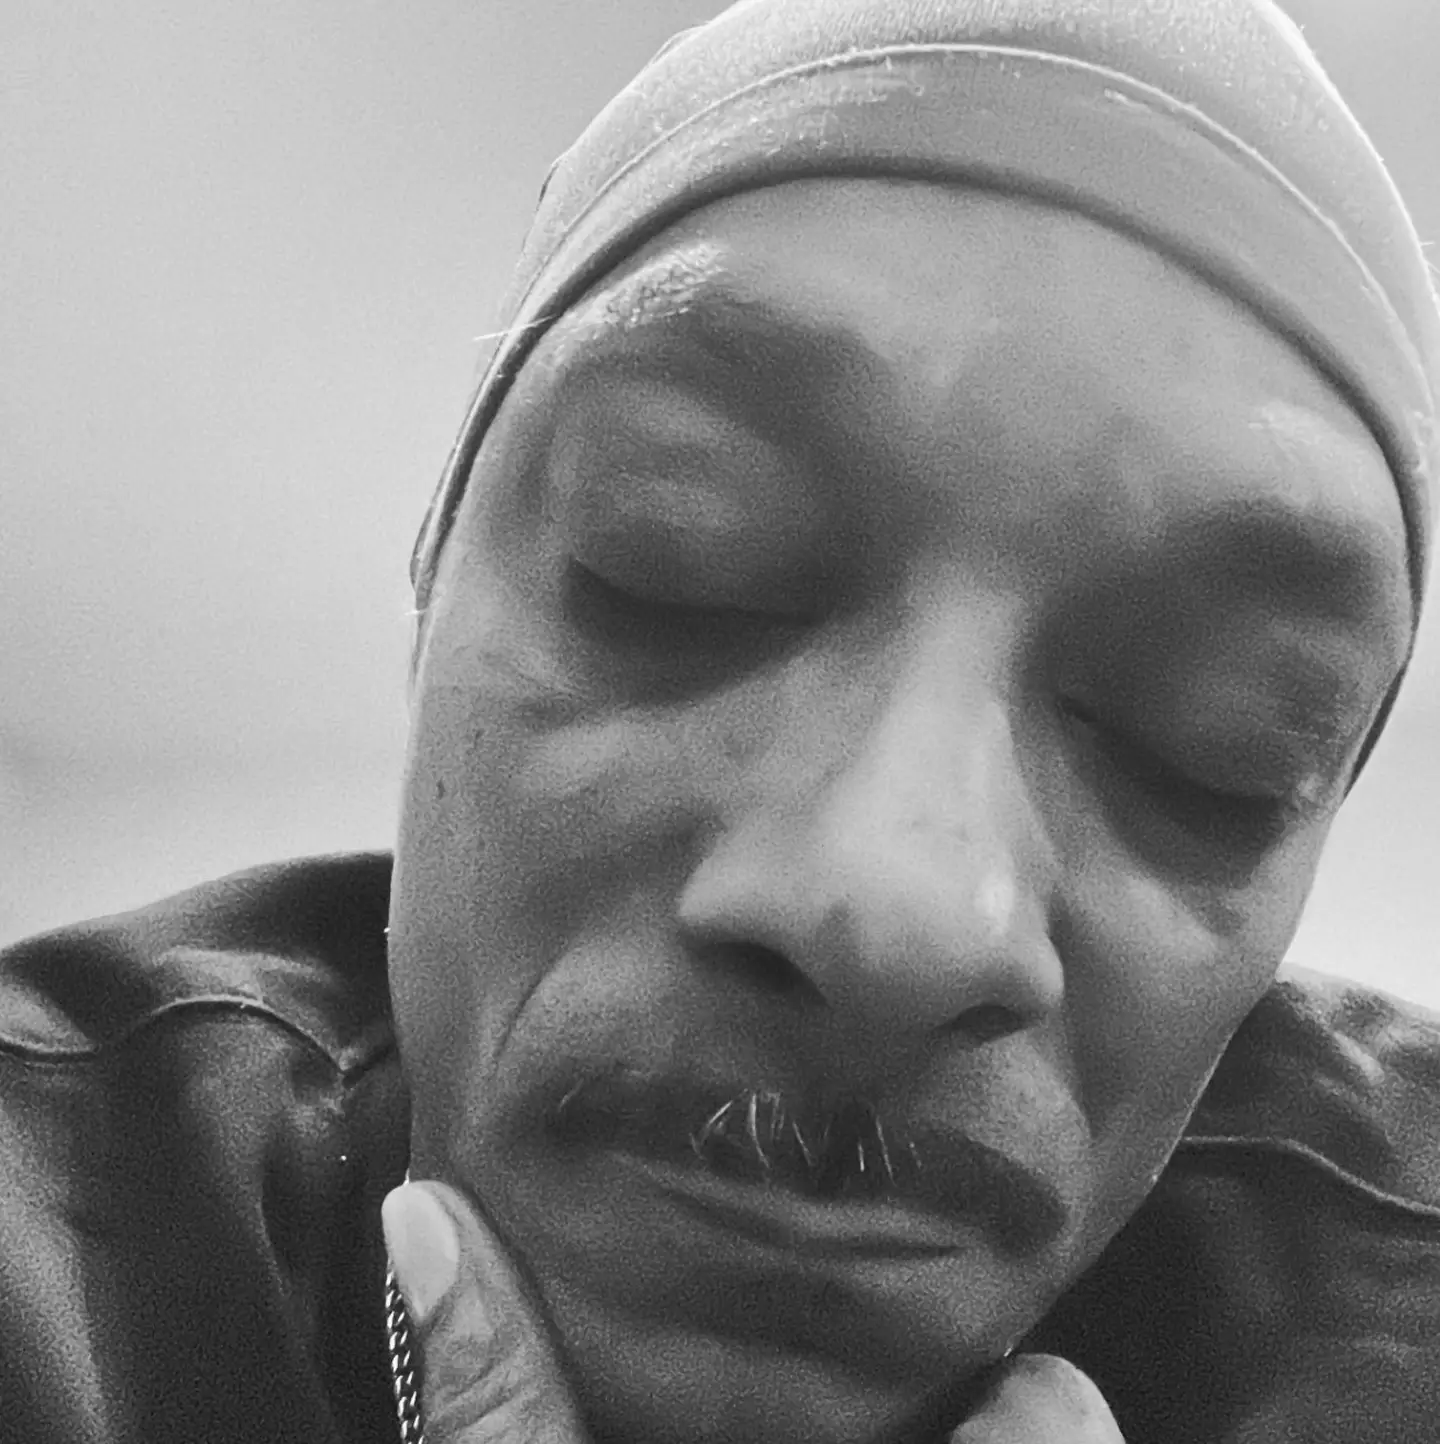 Snoop captioned an Instagram post 'Natural high'.